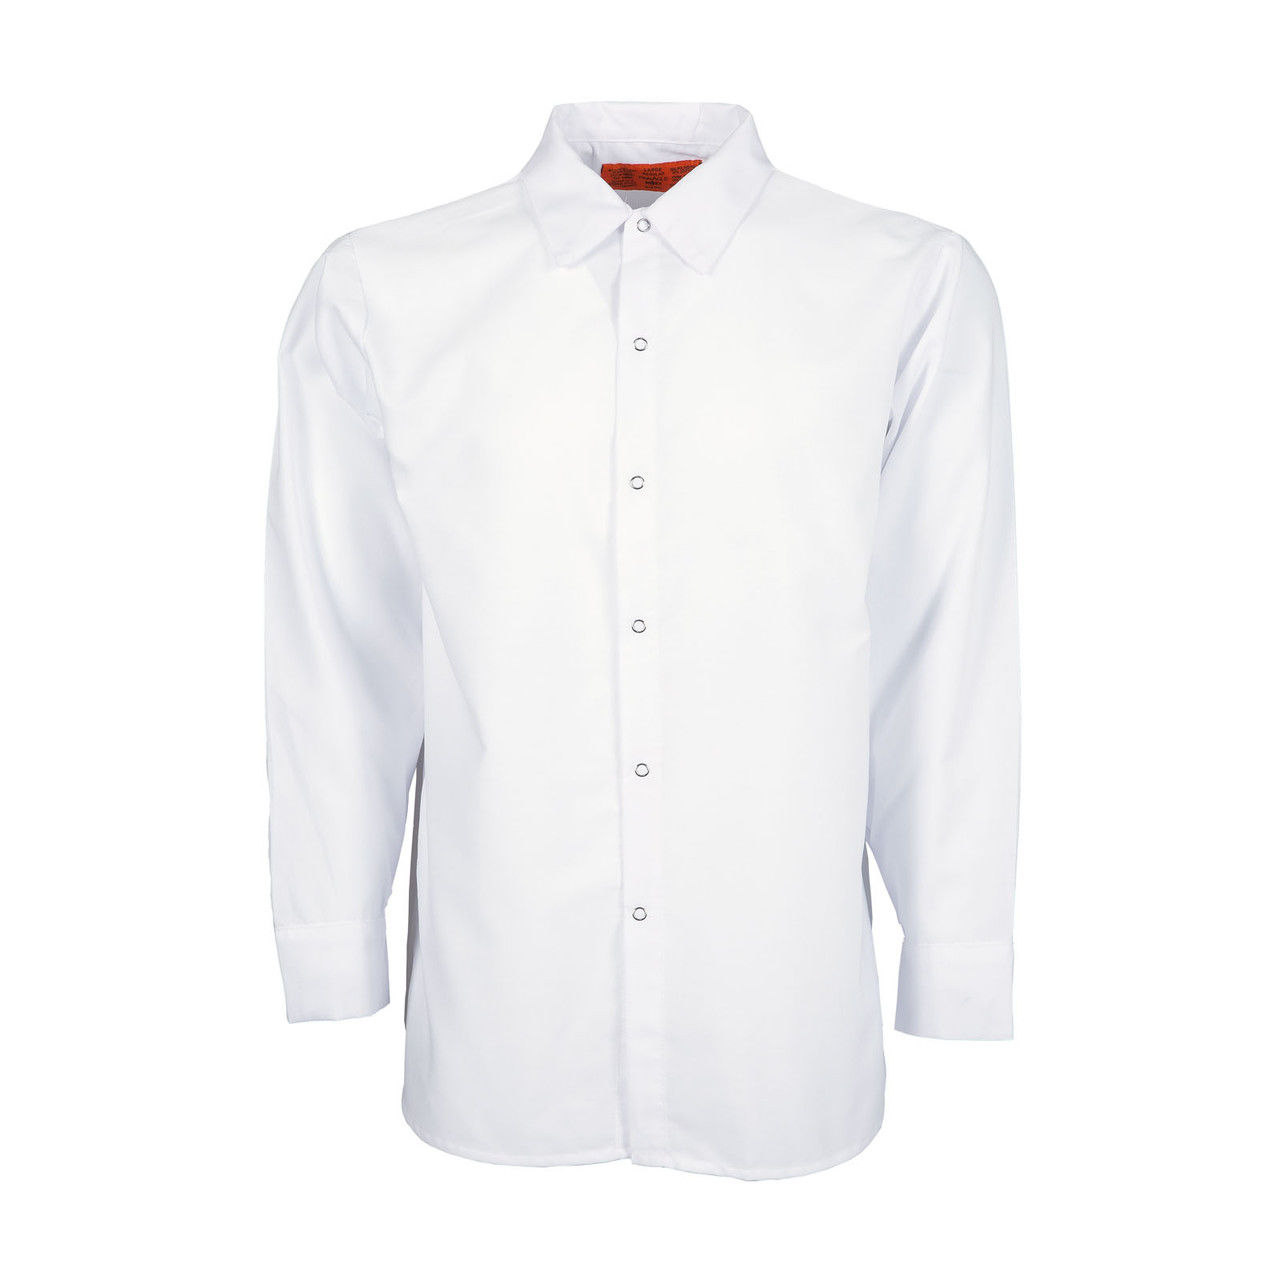 Do the white work shirts mens have any special features on the buttons?